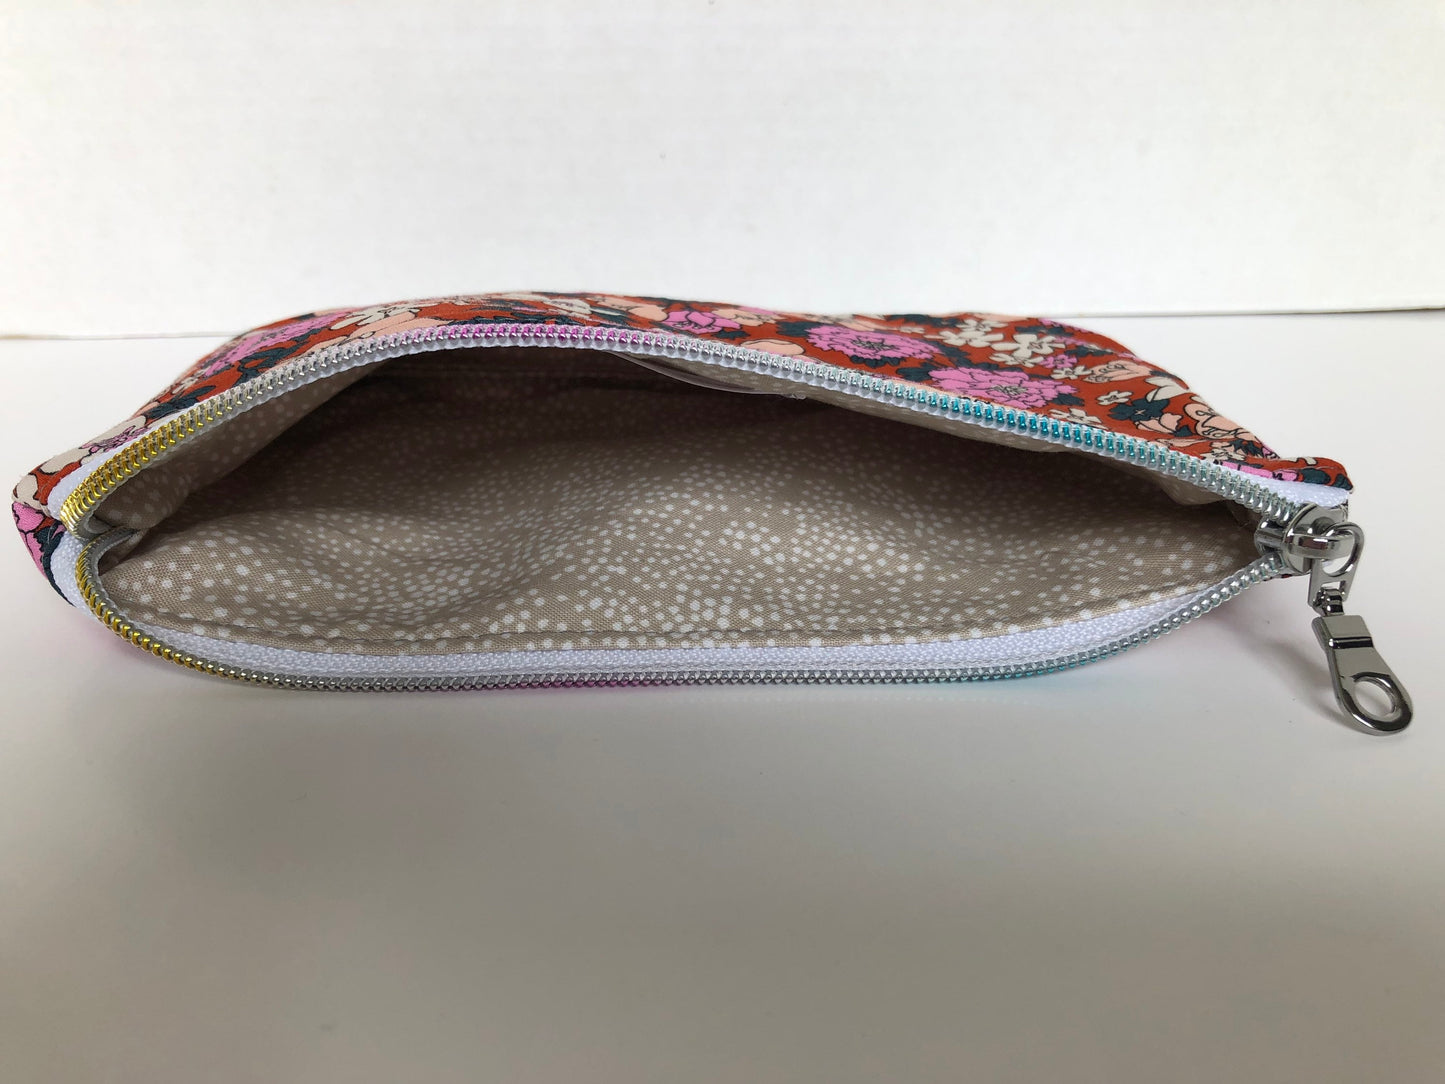 Pretty Floral Zipper Pouch with Cork Accents